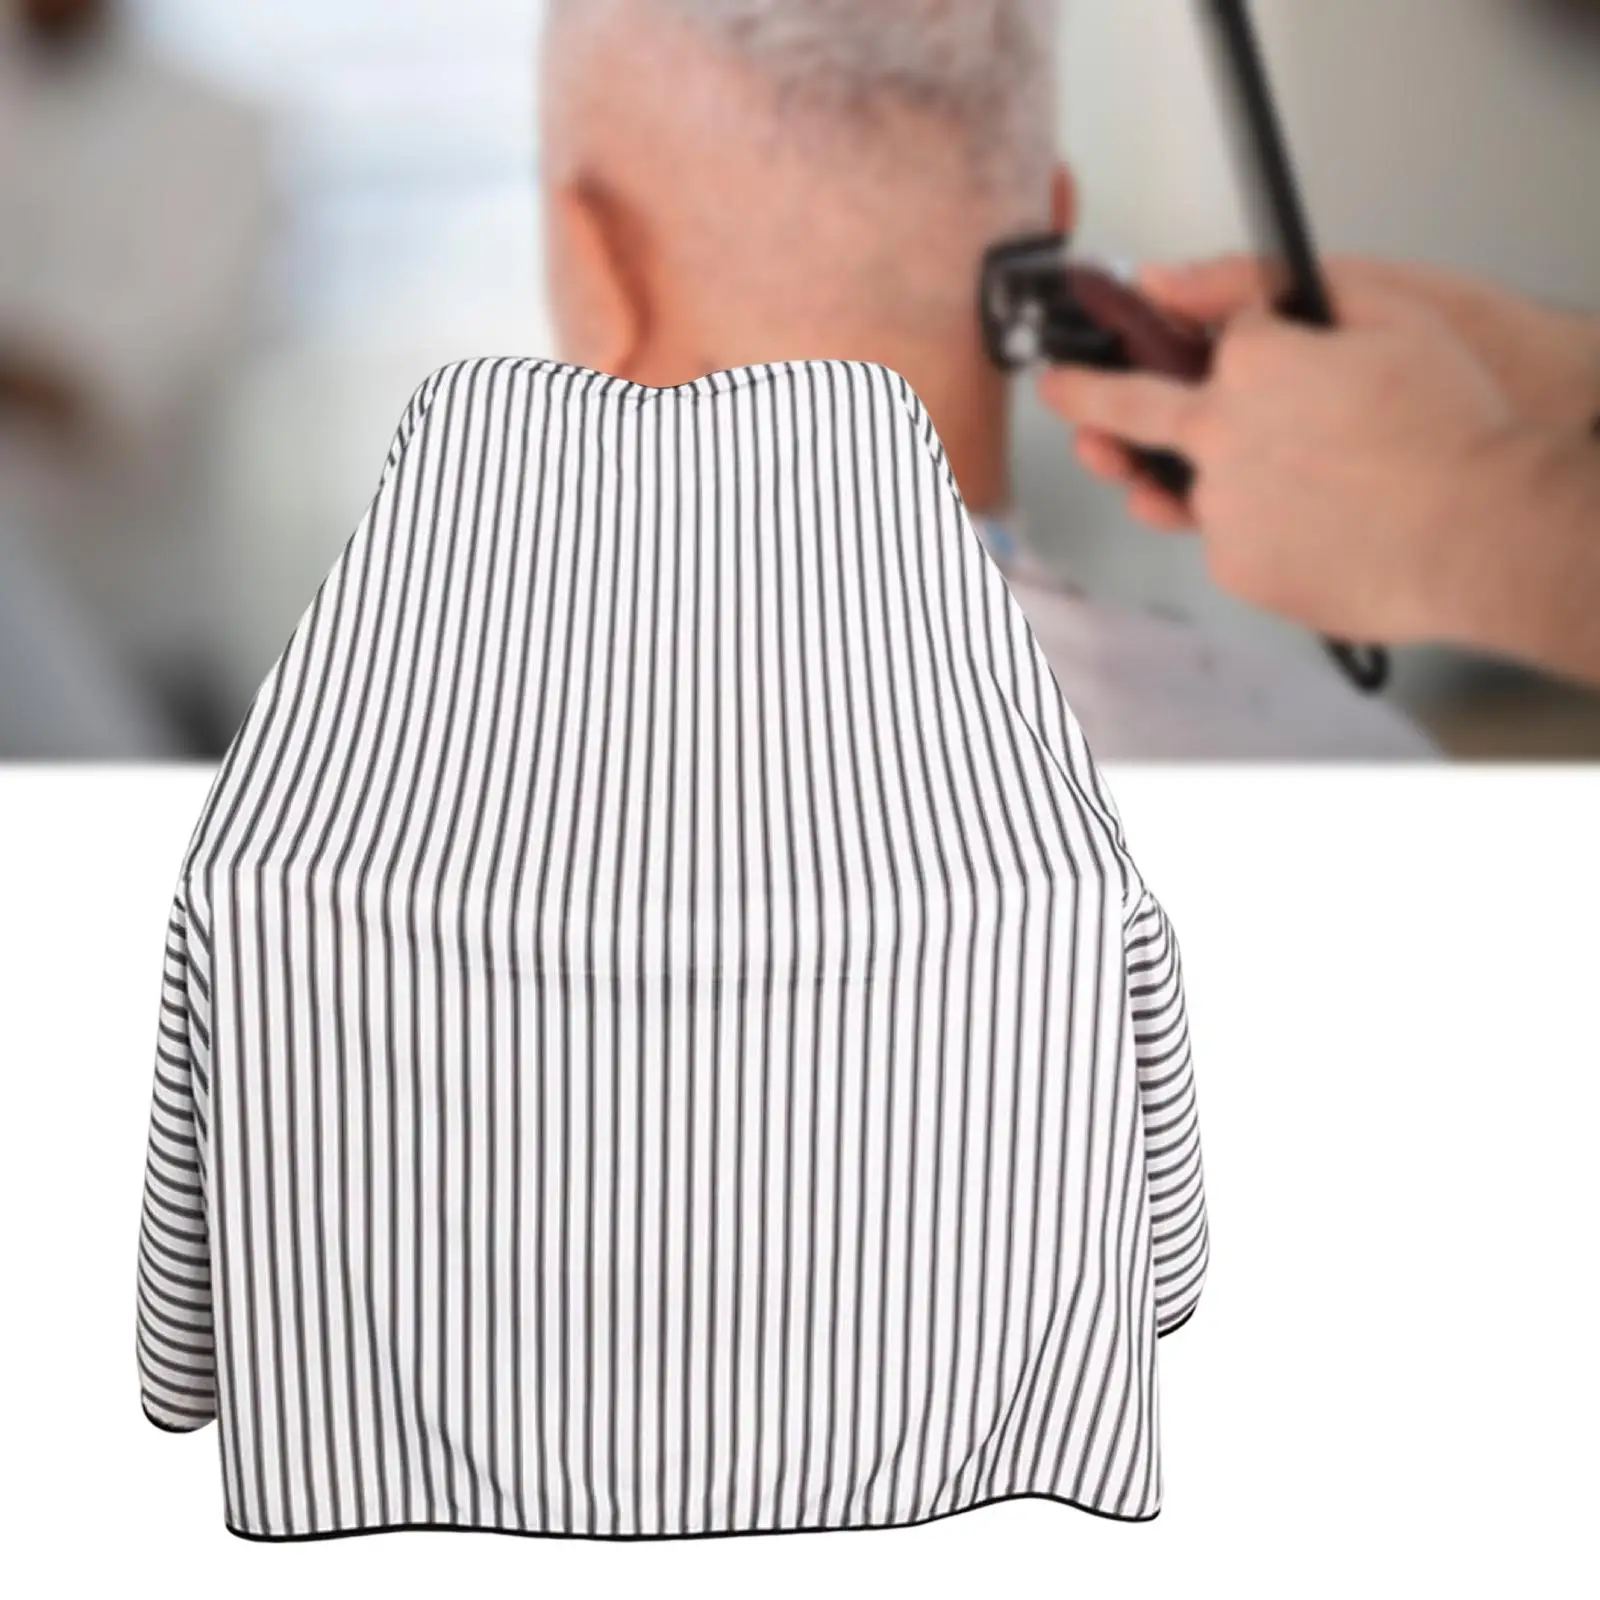 Salon Barber Cape Washable Reusable Professional Hair Dyeing Shawl Salon Equipment Cutting Hair Cape for Coloring Hairdressing